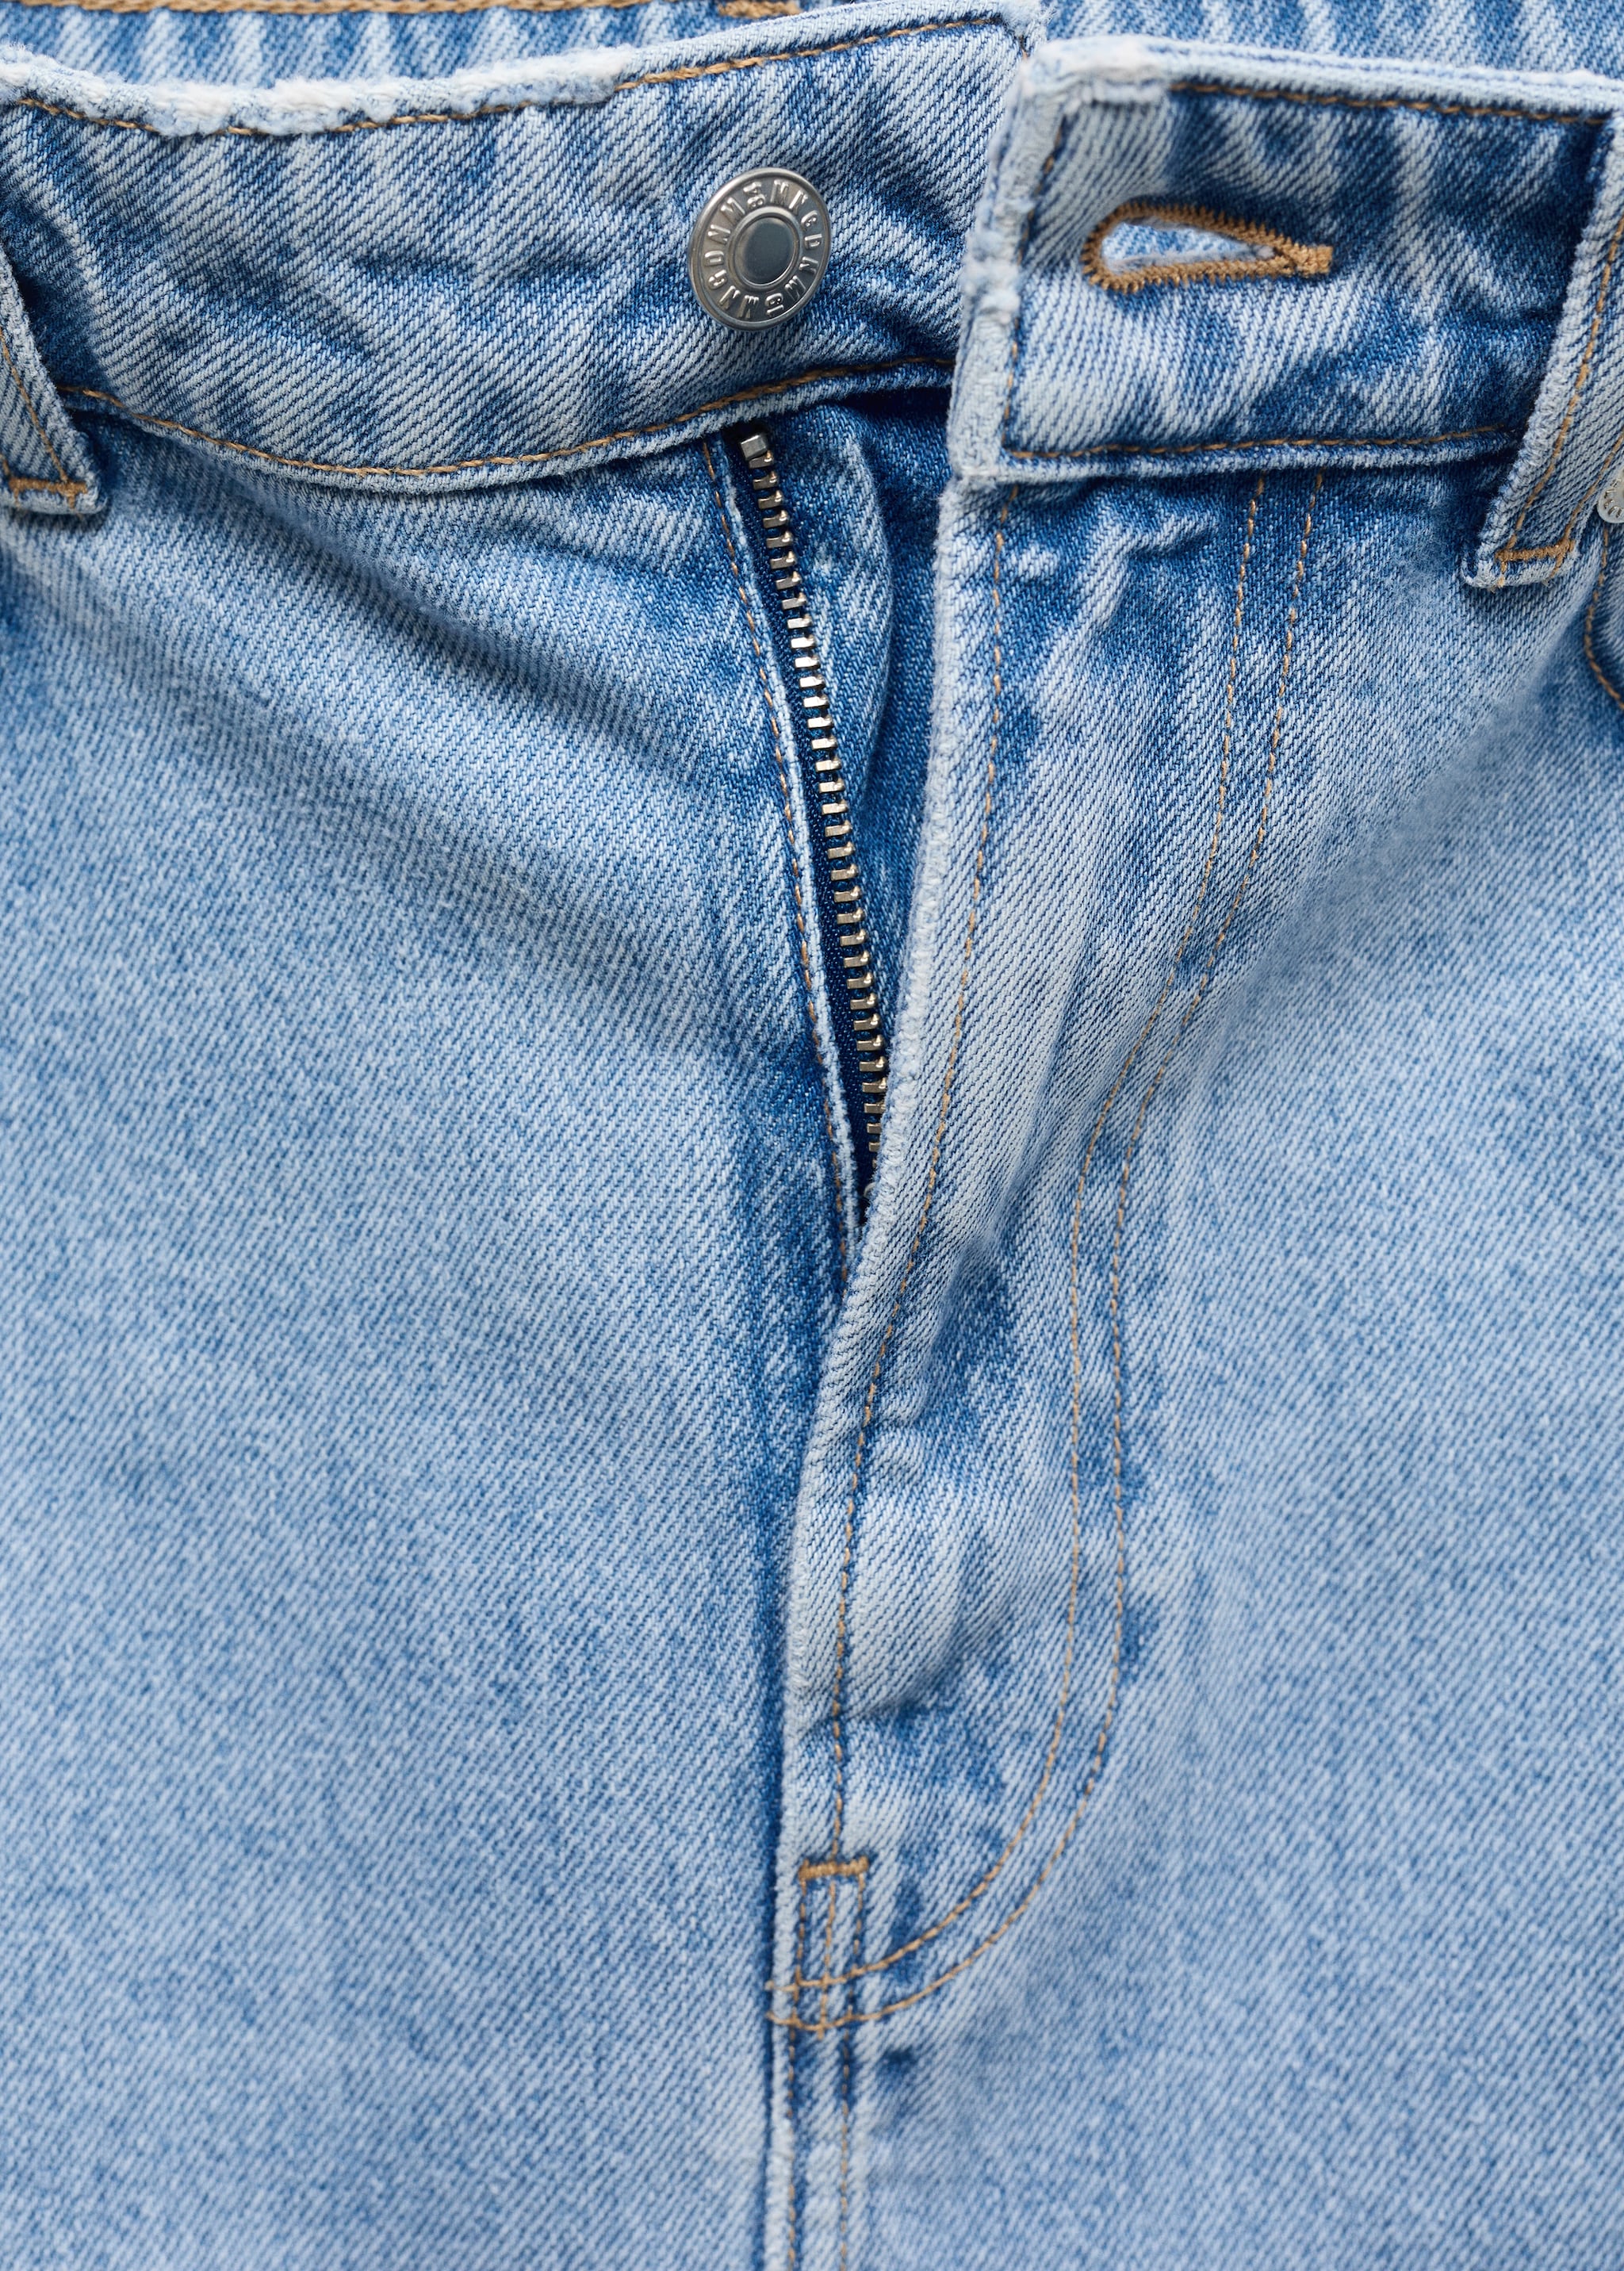 Denim skirt with frayed hem - Details of the article 8